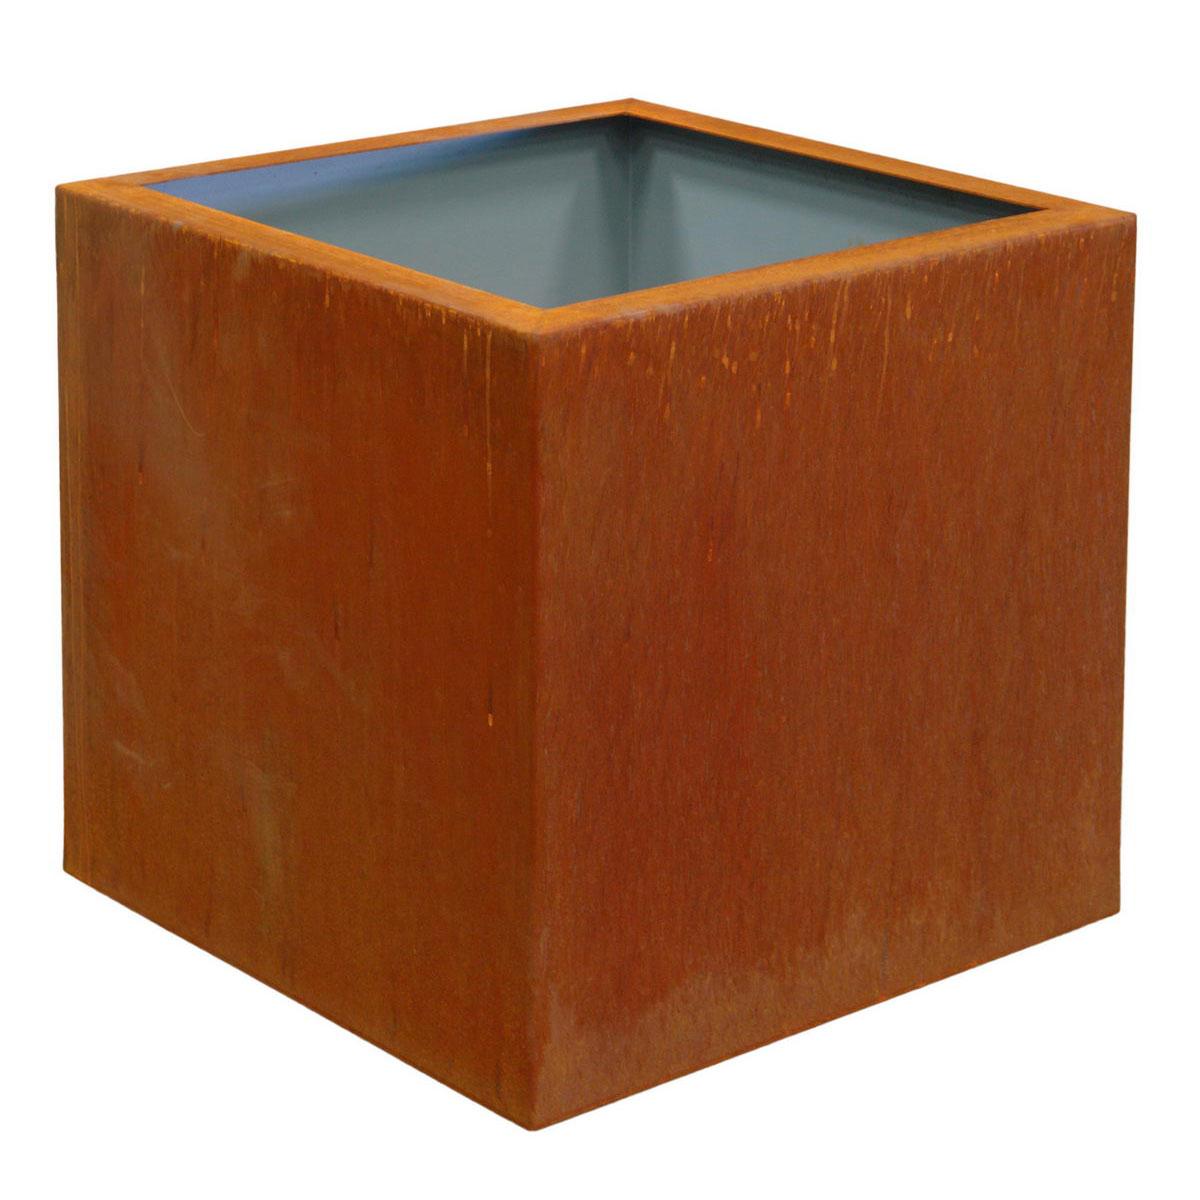 Cortenstyle Basic Trend Topper Square Planter IN\OUT